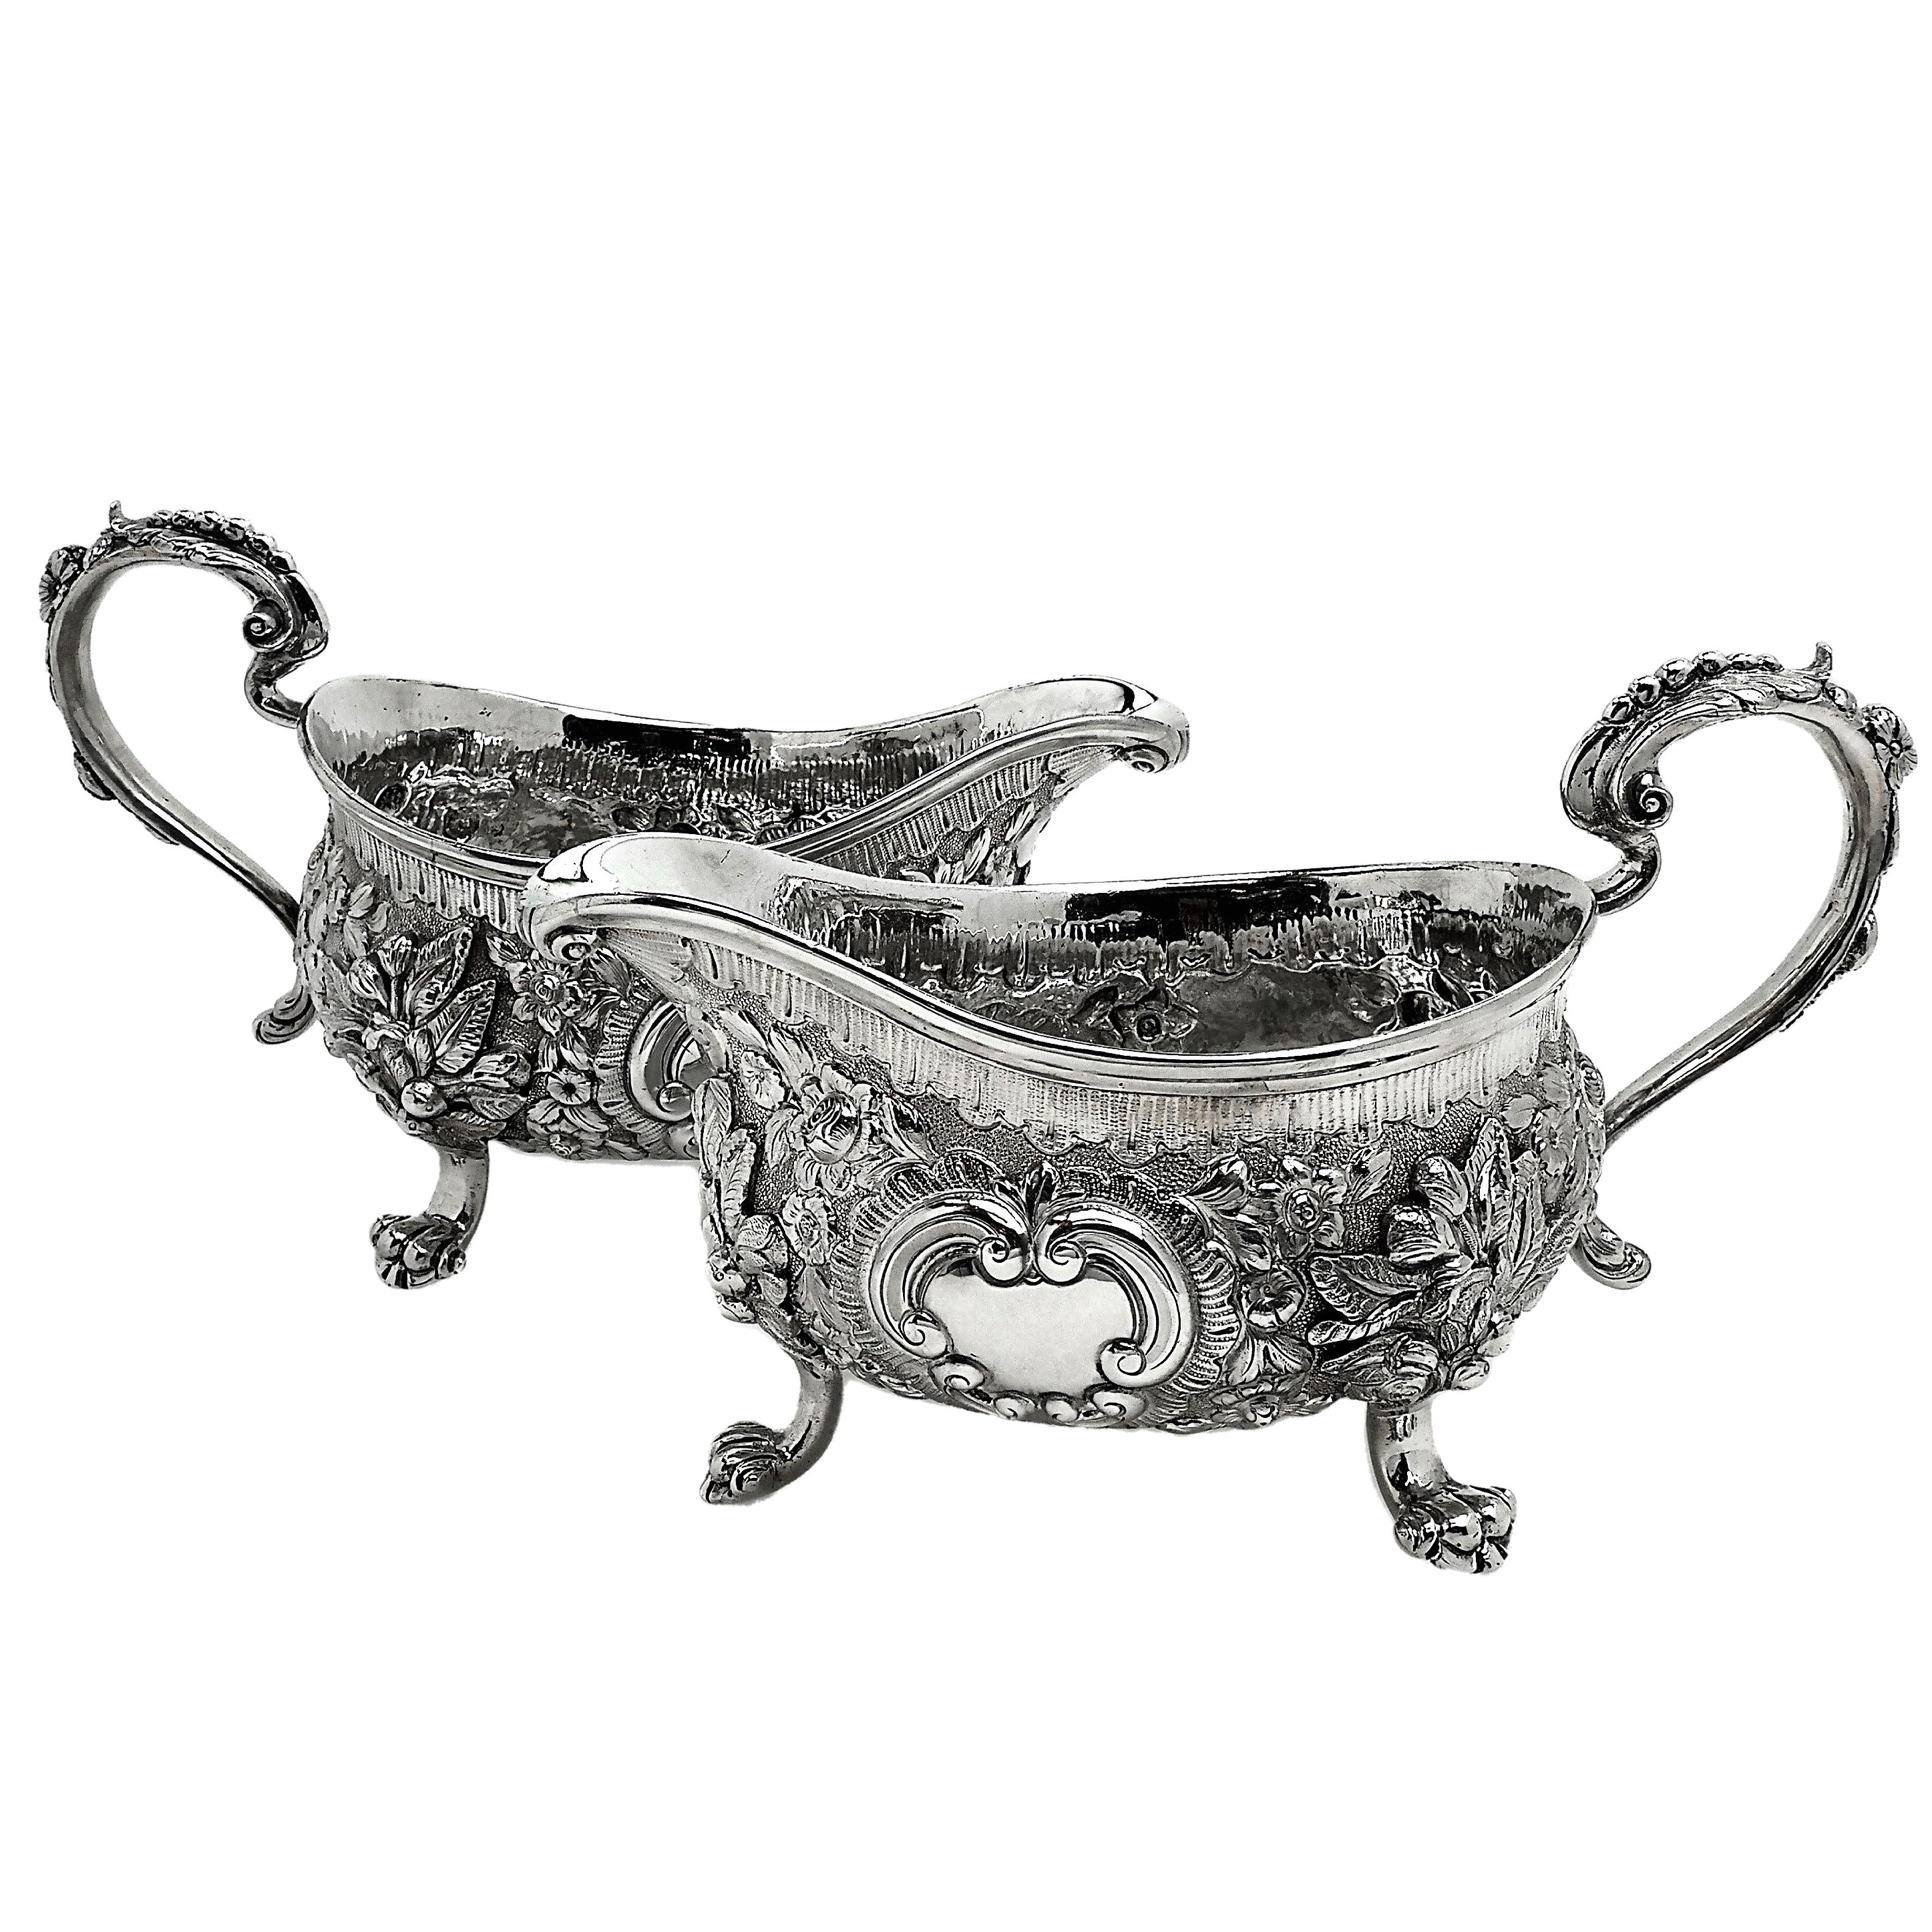 An impressive Pair of Antique Georgian solid Silver Sauce / Gravy Boats. These Gravy Boats are of notably substantial size and weight. Each Sauce Boat is embellished with an ornate chased design incorporating floral and scroll patterns. Each Jug has